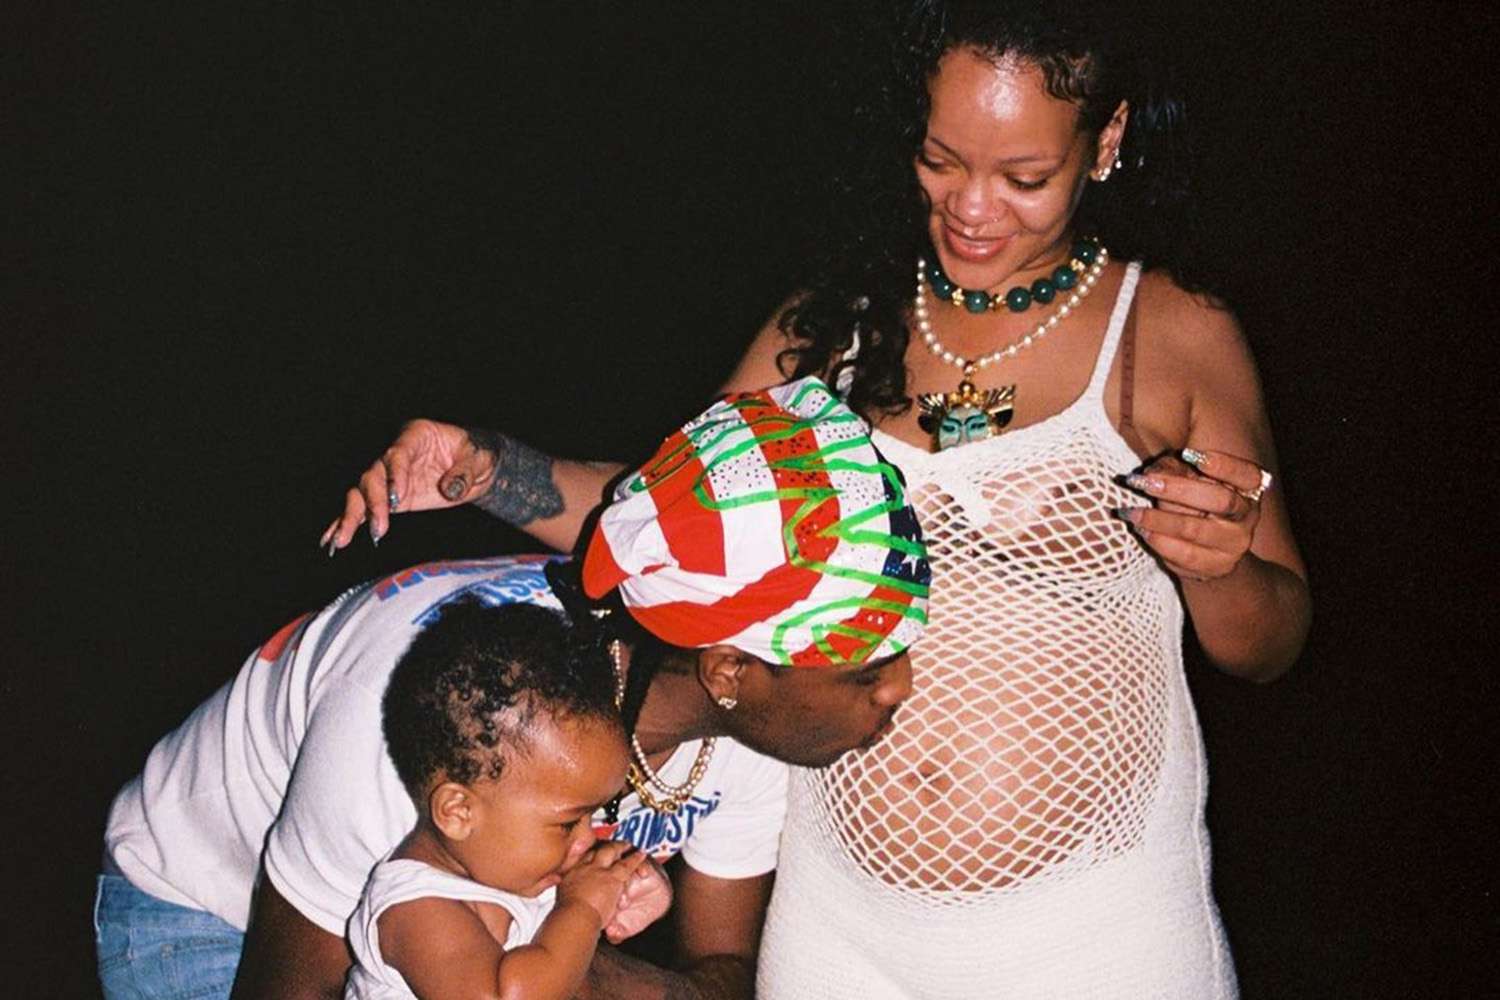 A$AP Rocky's Father's Day Photos: His Partner's Adorable Reaction Will Melt Your Heart! 15